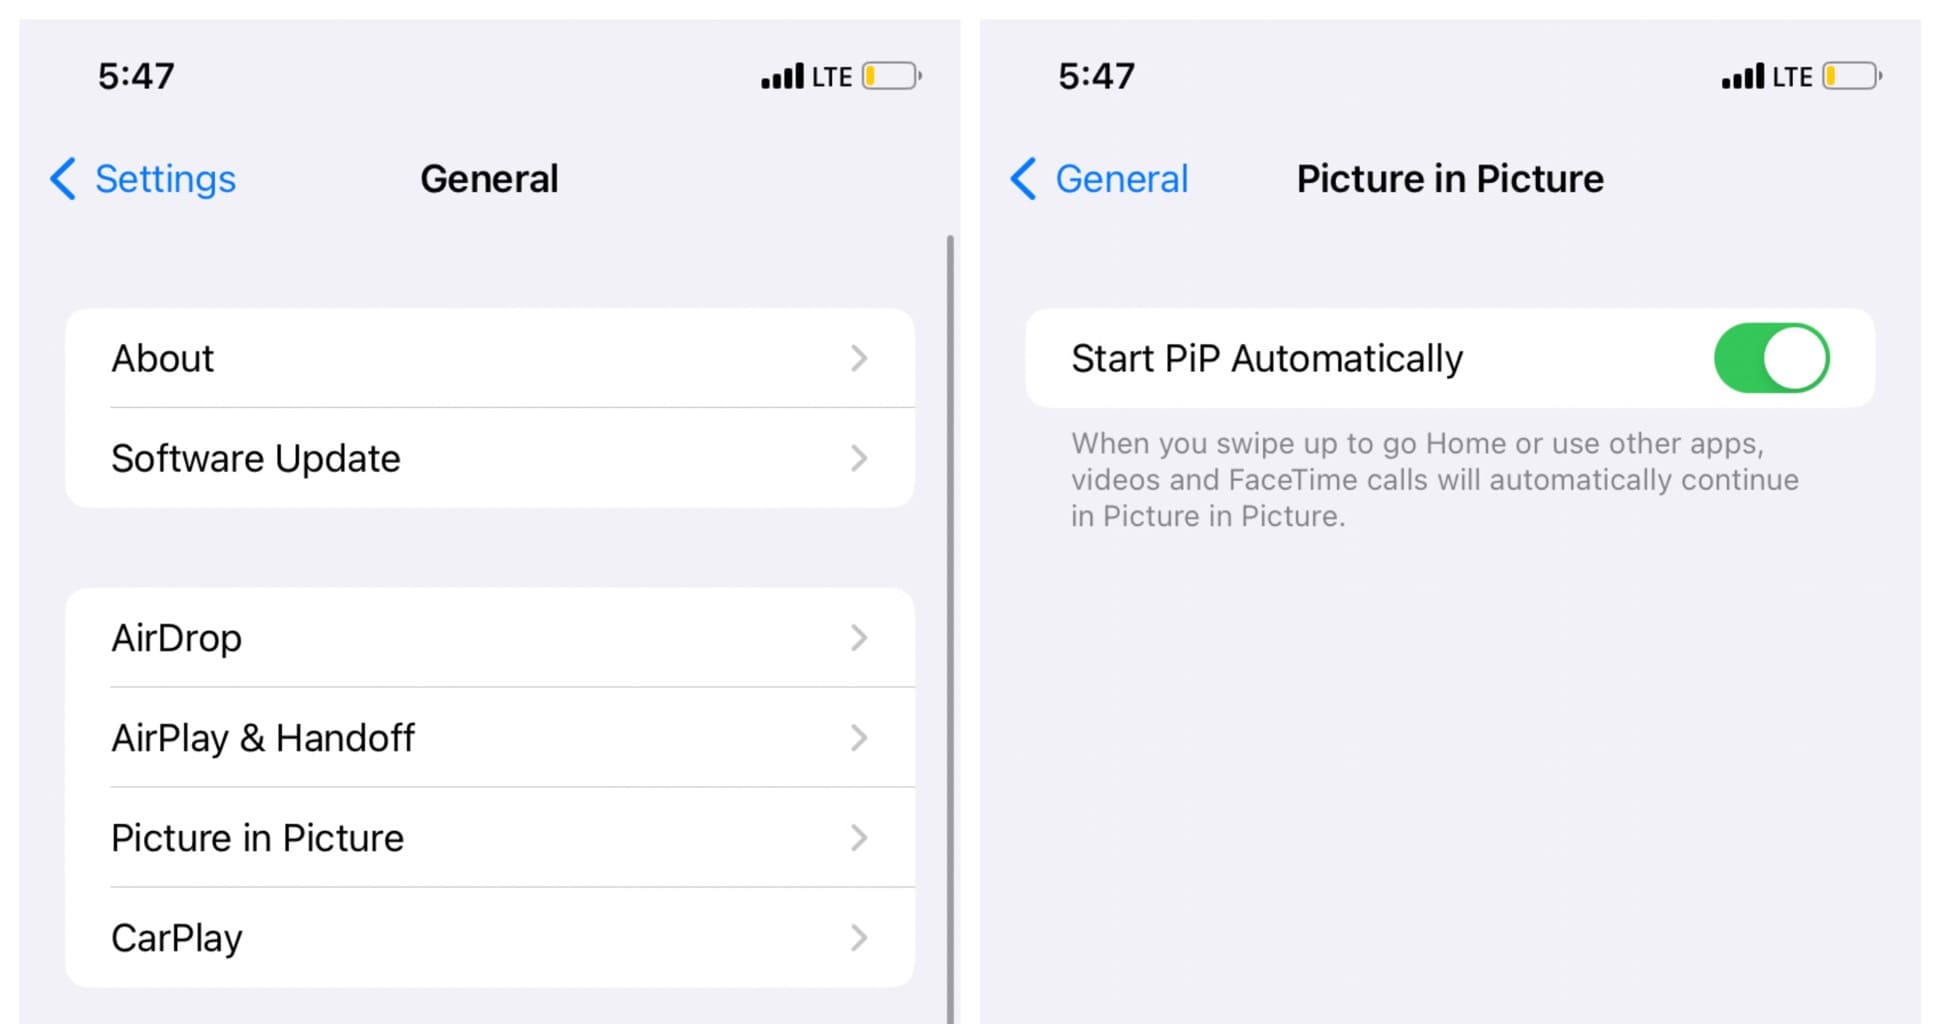 Enable picture-in-picture on iOS settings